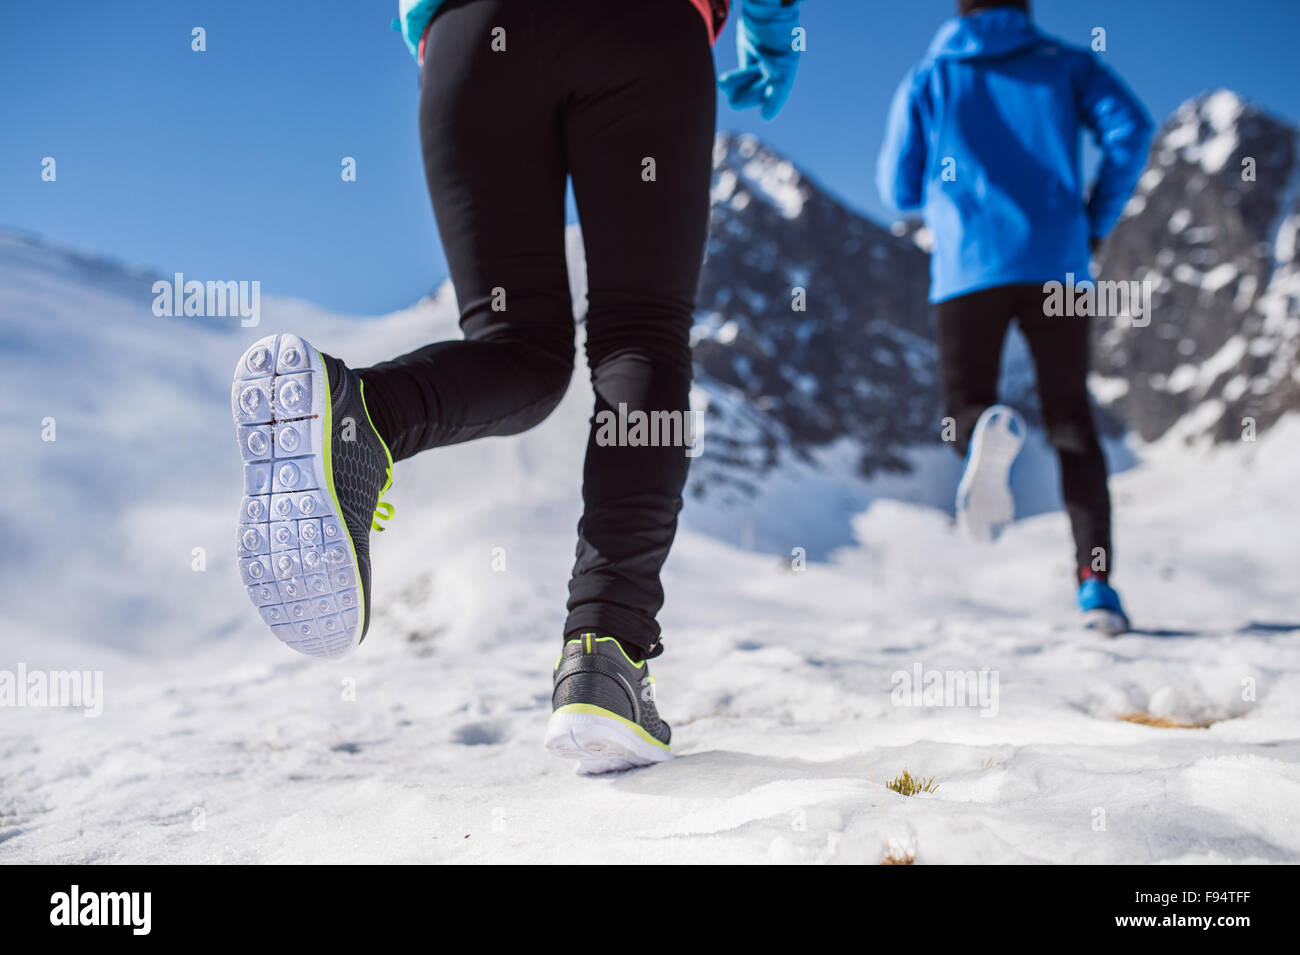 Legs of two runners outside in winter nature Stock Photo